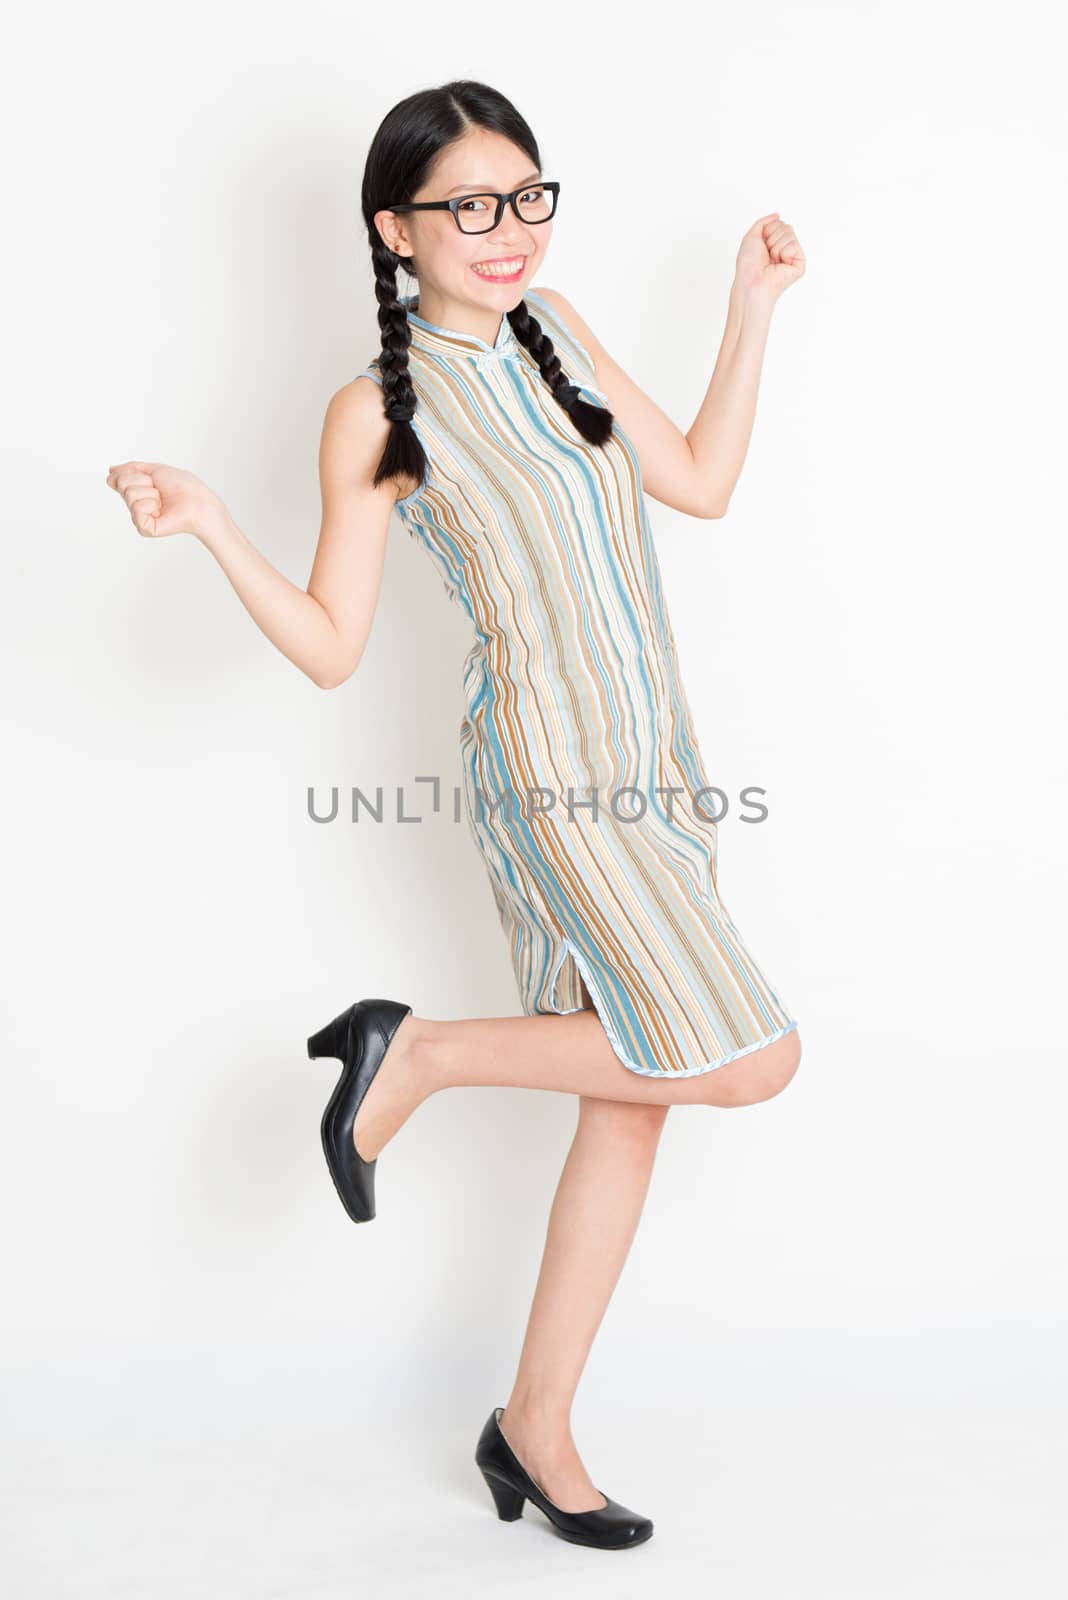 Portrait of excited young Asian girl in traditional qipao dress jumping around and hand holding something, full length standing on plain background.